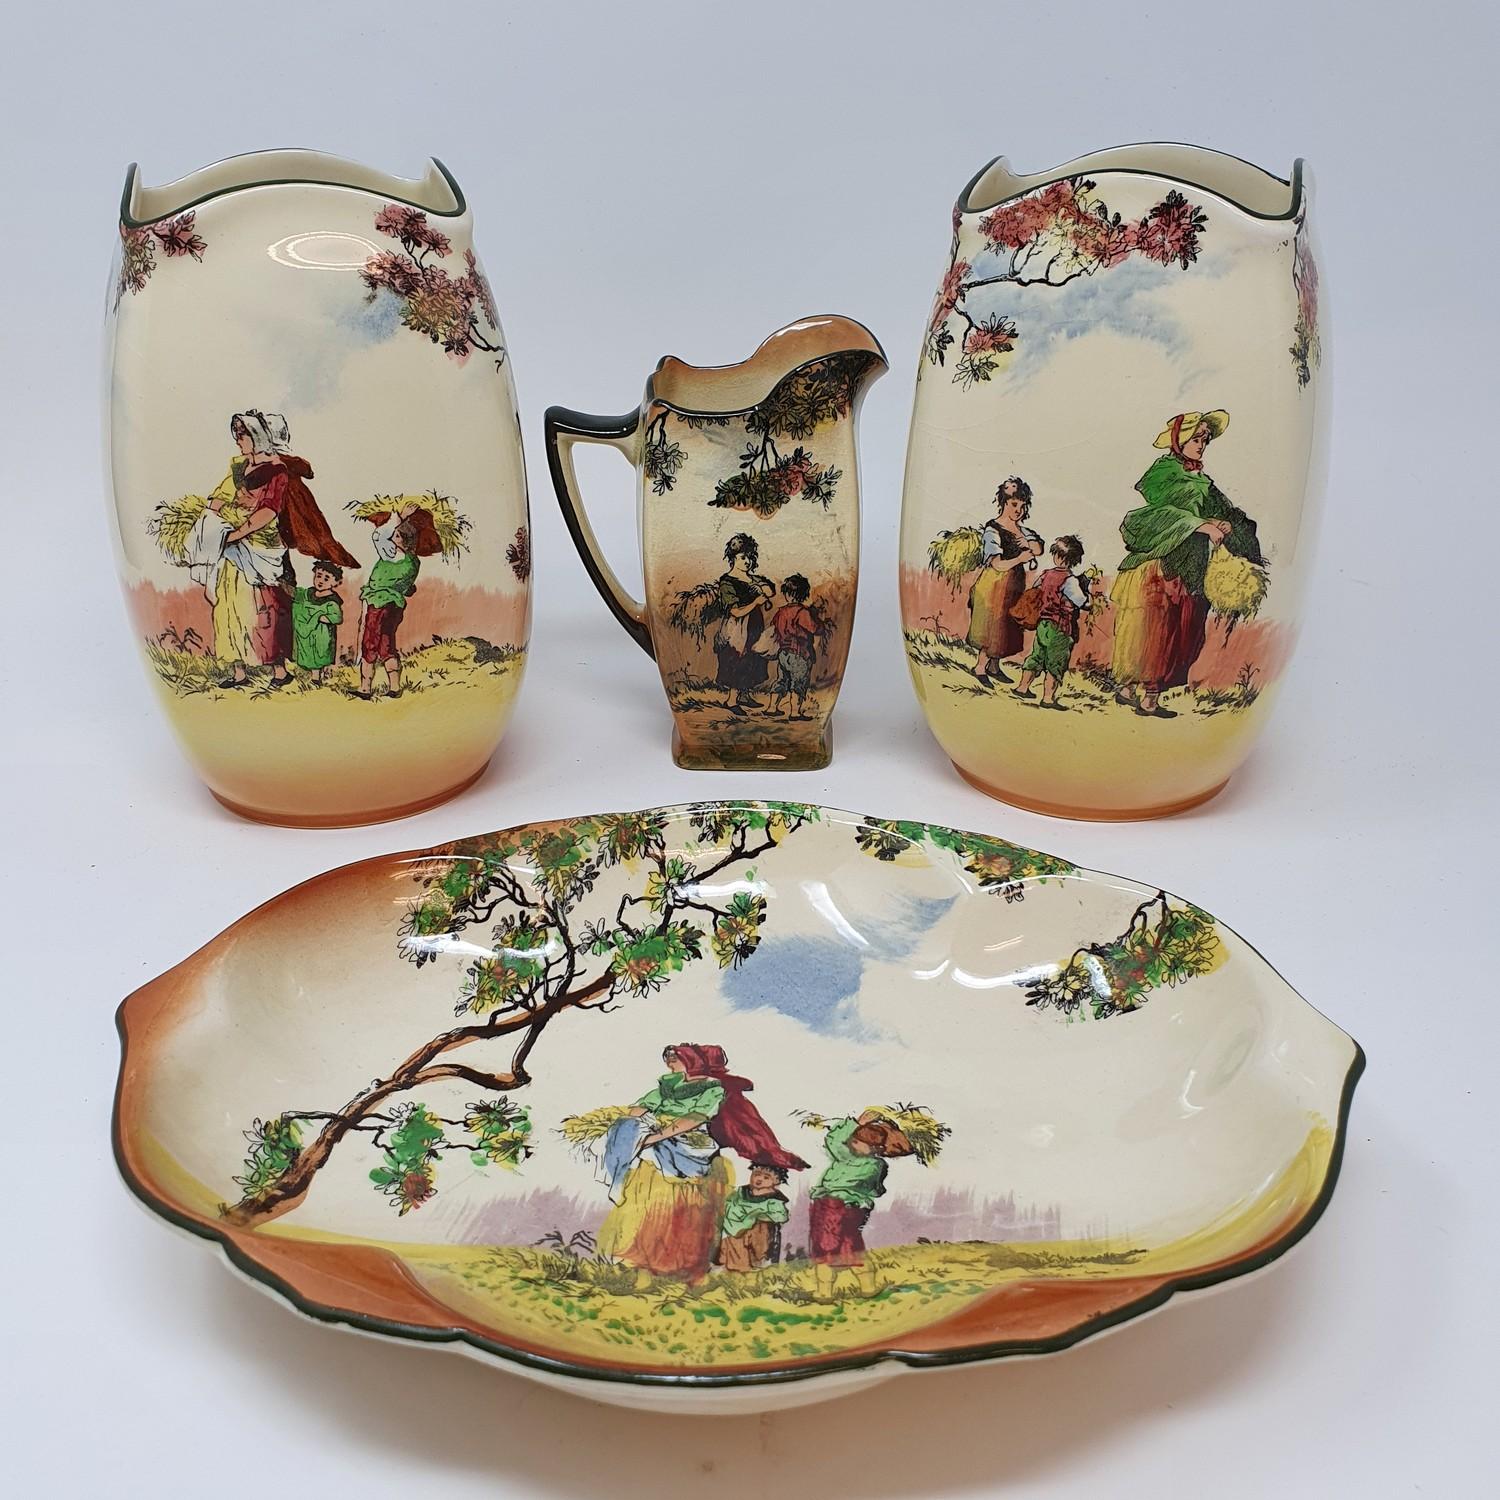 A pair of Royal Doulton Series ware vases, and various other Series ware (box)